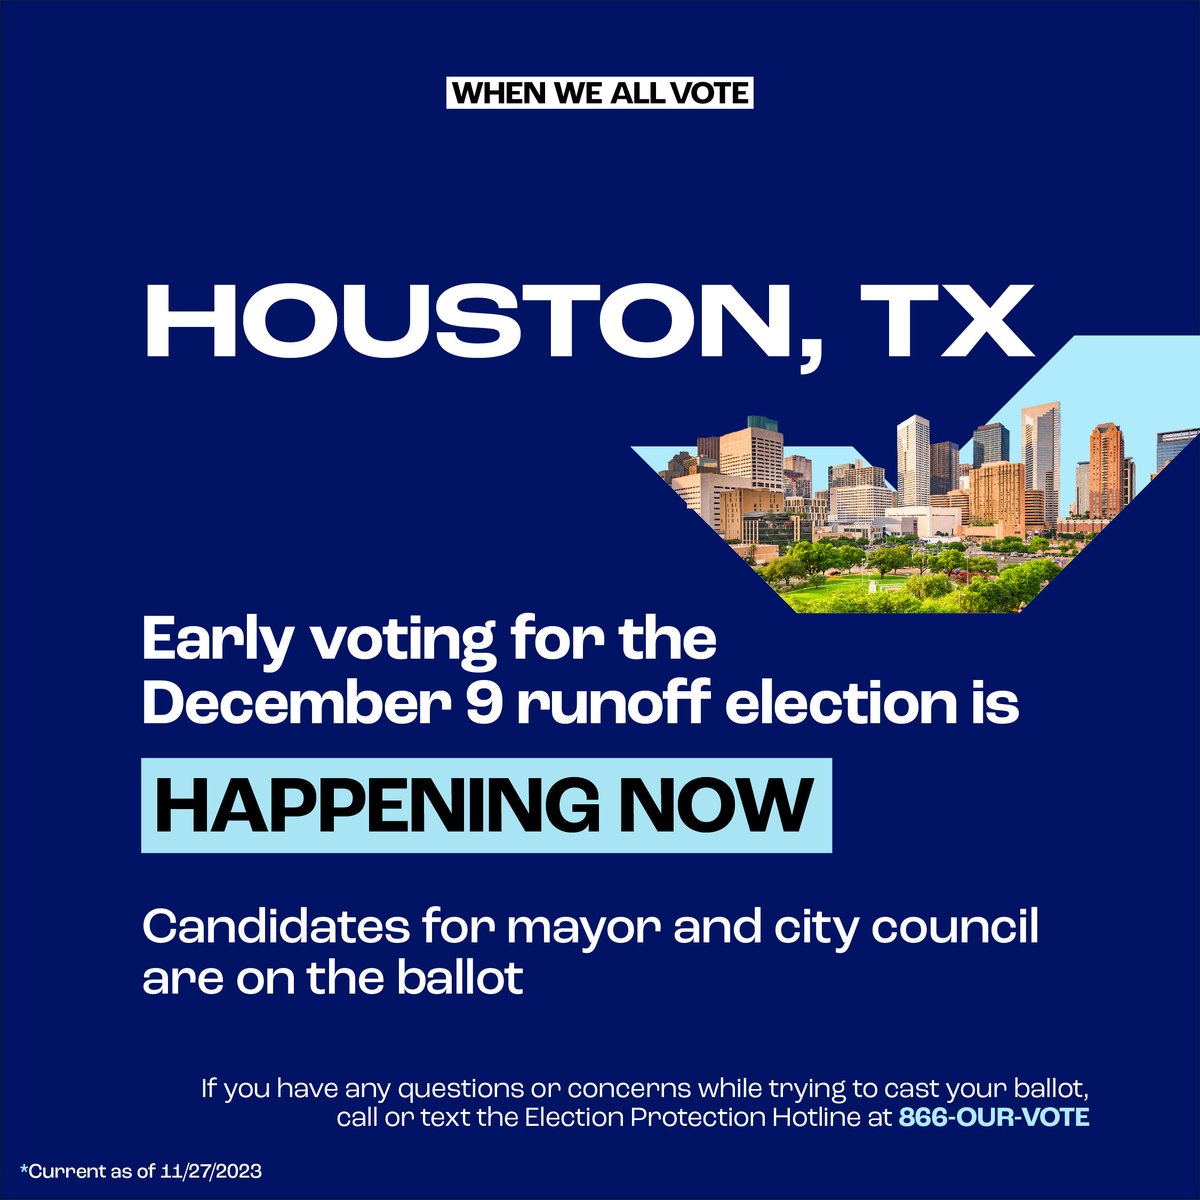 Hey Houston! 🧑🏾‍🚀🔭 Early voting for your December 9th runoff election officially starts TODAY! Don’t miss the opportunity to make YOUR voice heard in the races for mayor and city council 🗣️ Blast 🚀 on over to weall.vote/houston RN to make your plan to vote early!